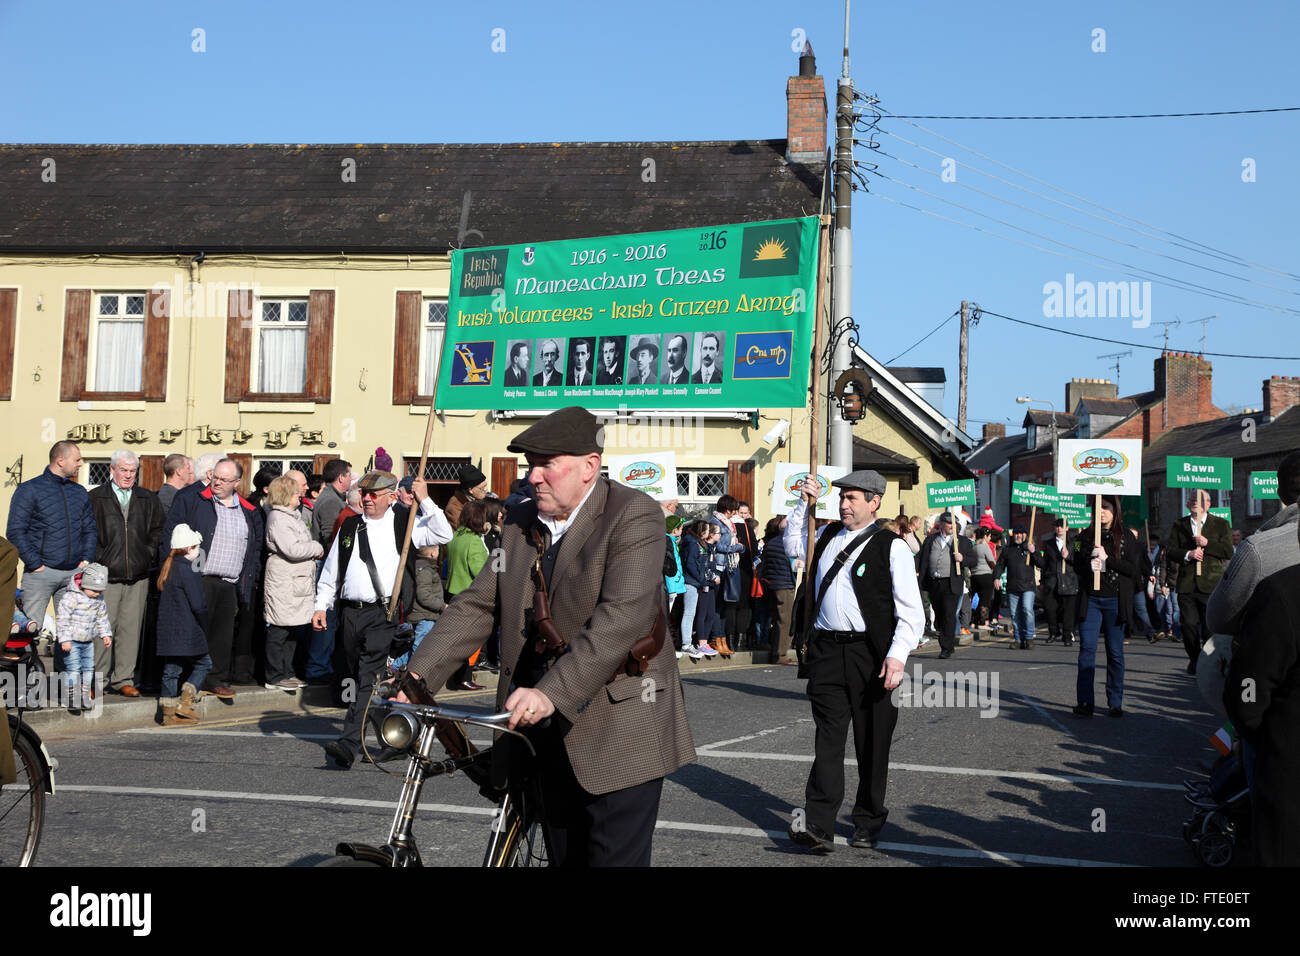 Commemoration of 1916 Irish Citizen Army in the St Patricks Day Parade Carrickmacross Stock Photo